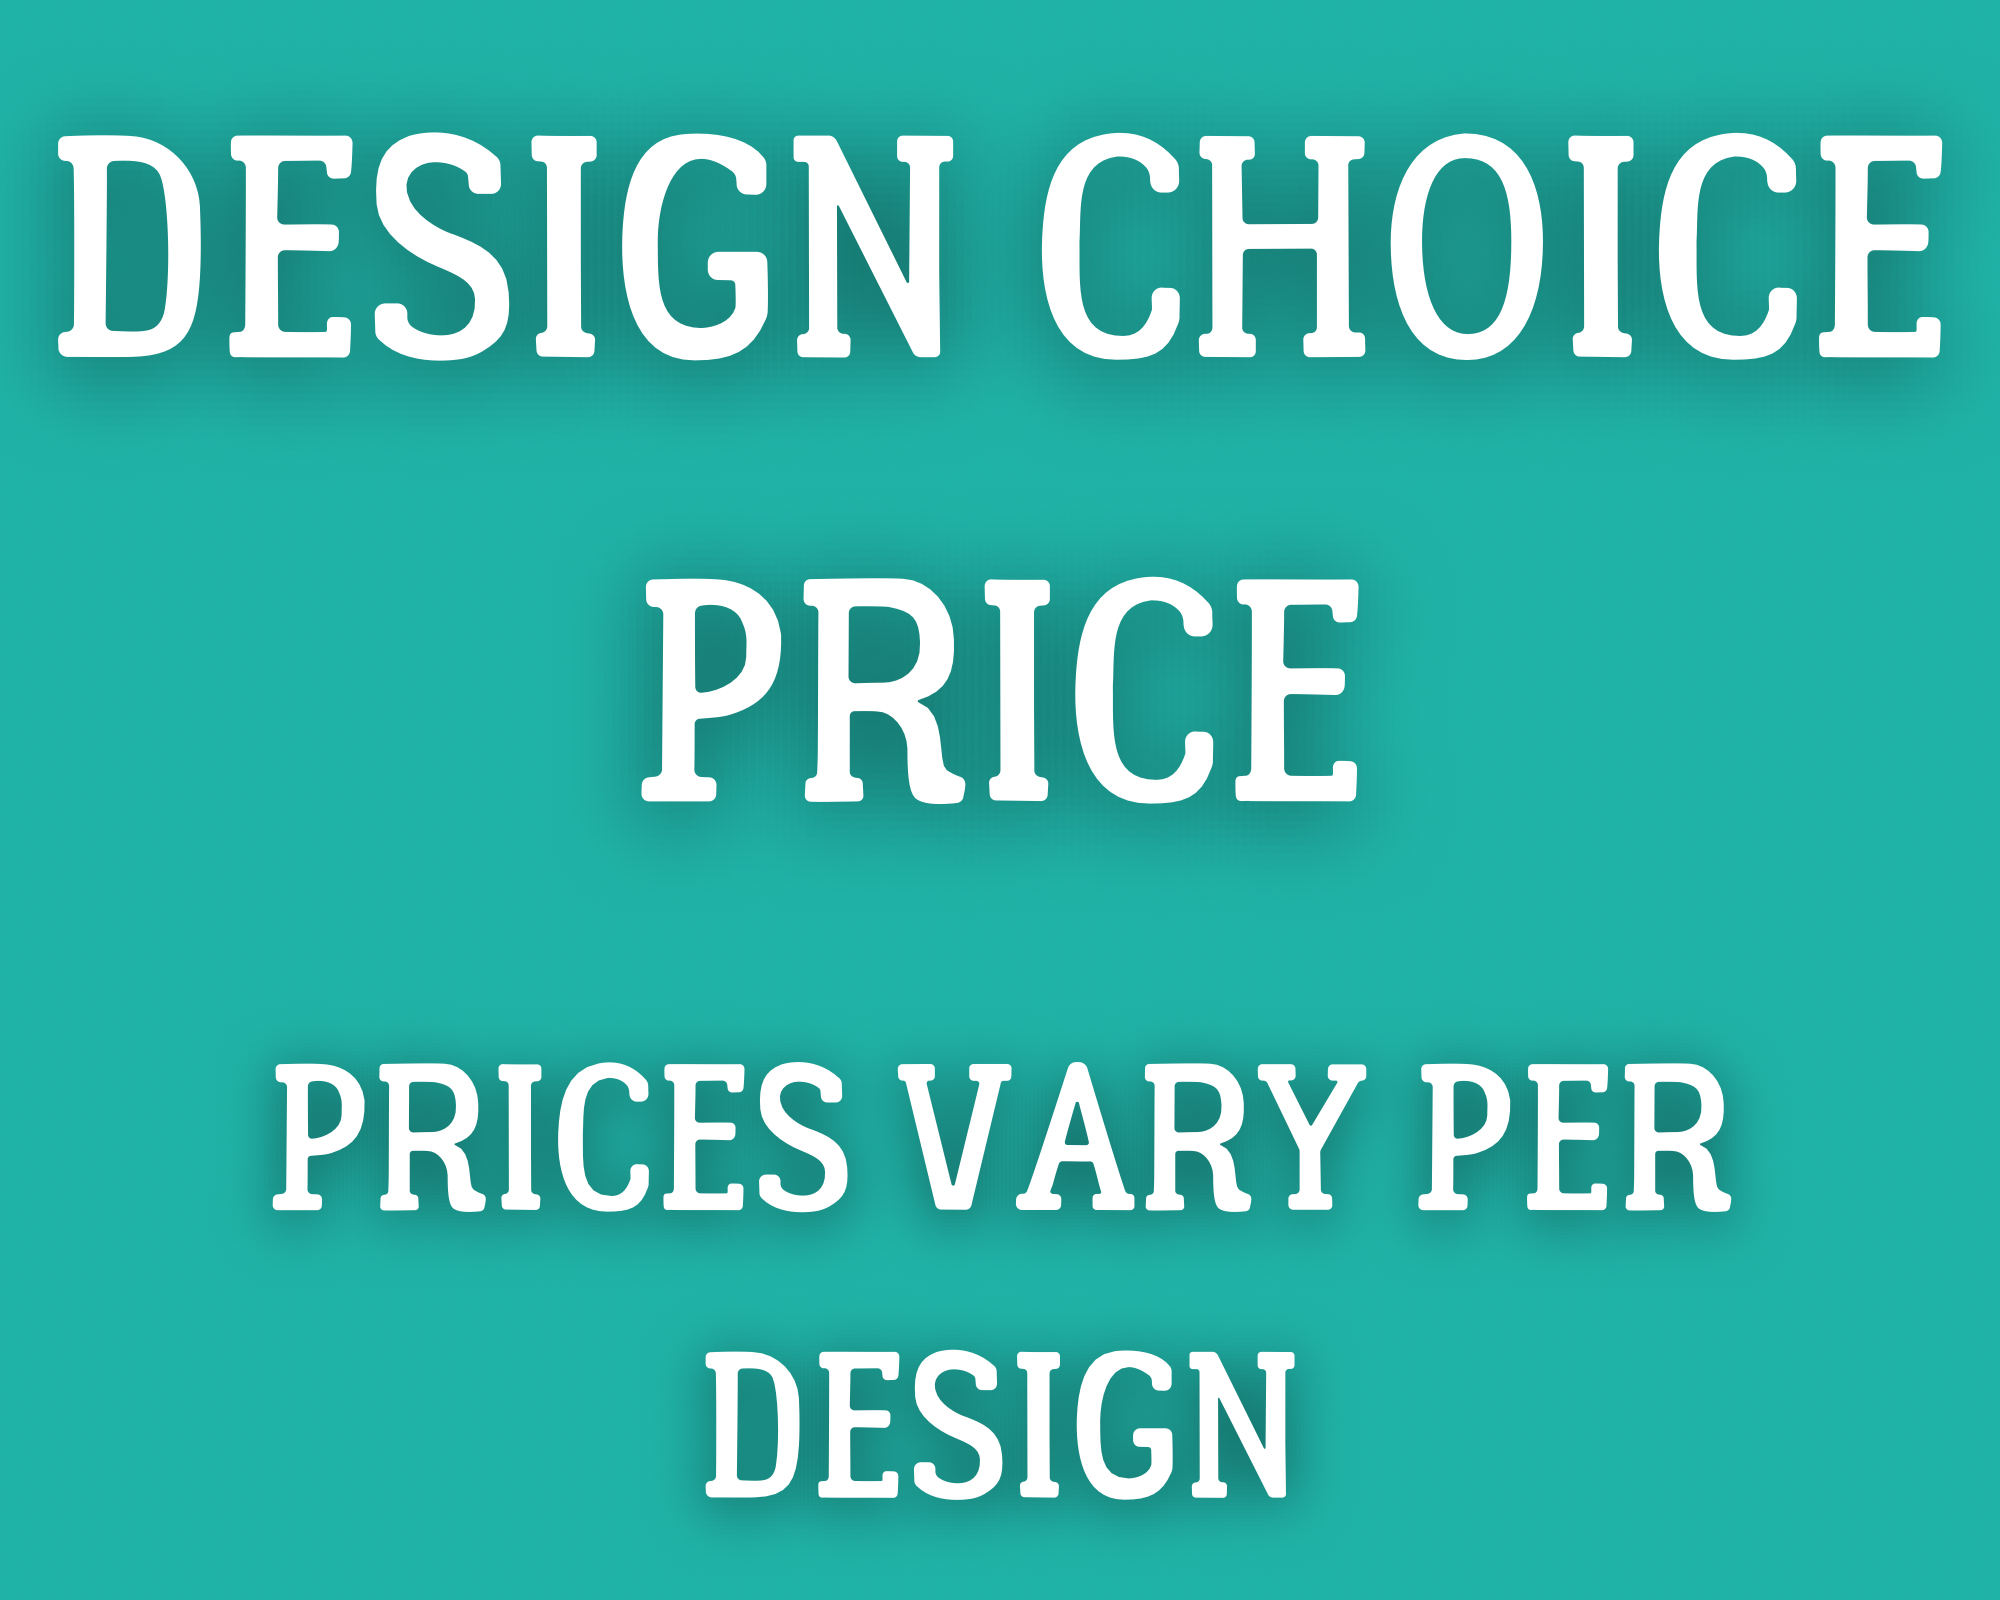 Design Choice; Prices Vary per Design. DO NOT DELETE OR YOUR ORDER WILL BE REJECTED.